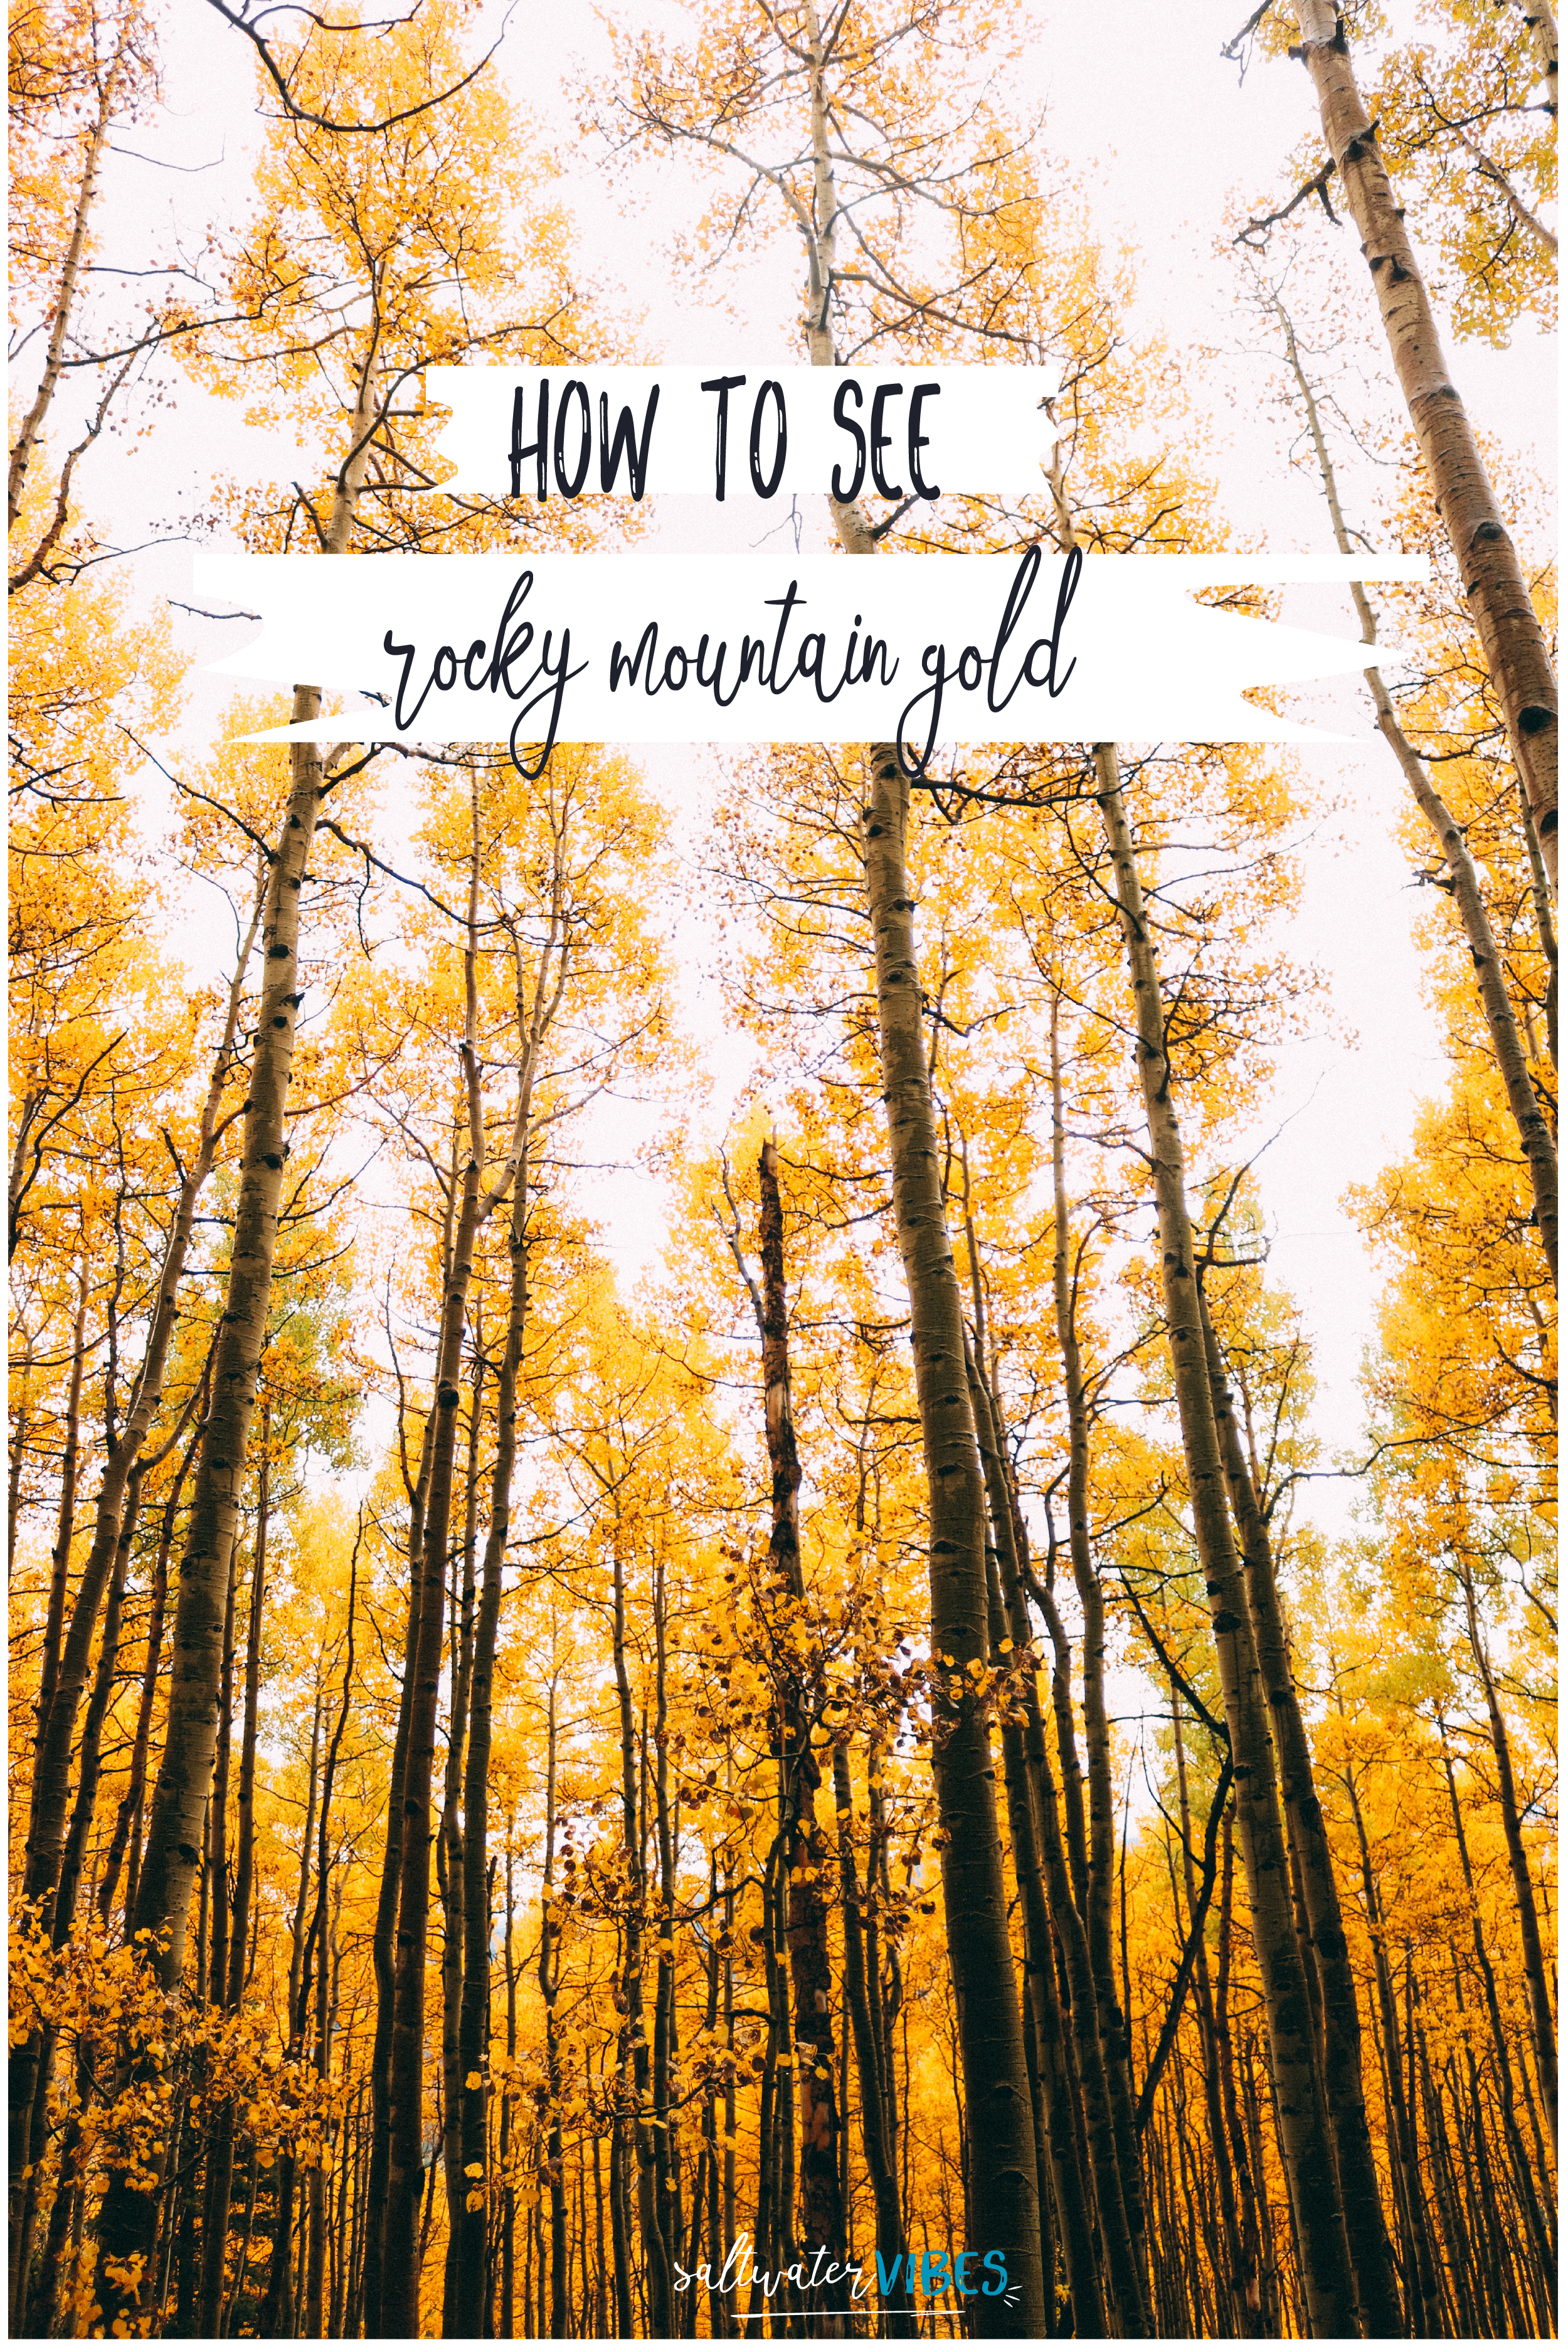 Where To See Golden Aspens In Colorado | SaltWaterVibes